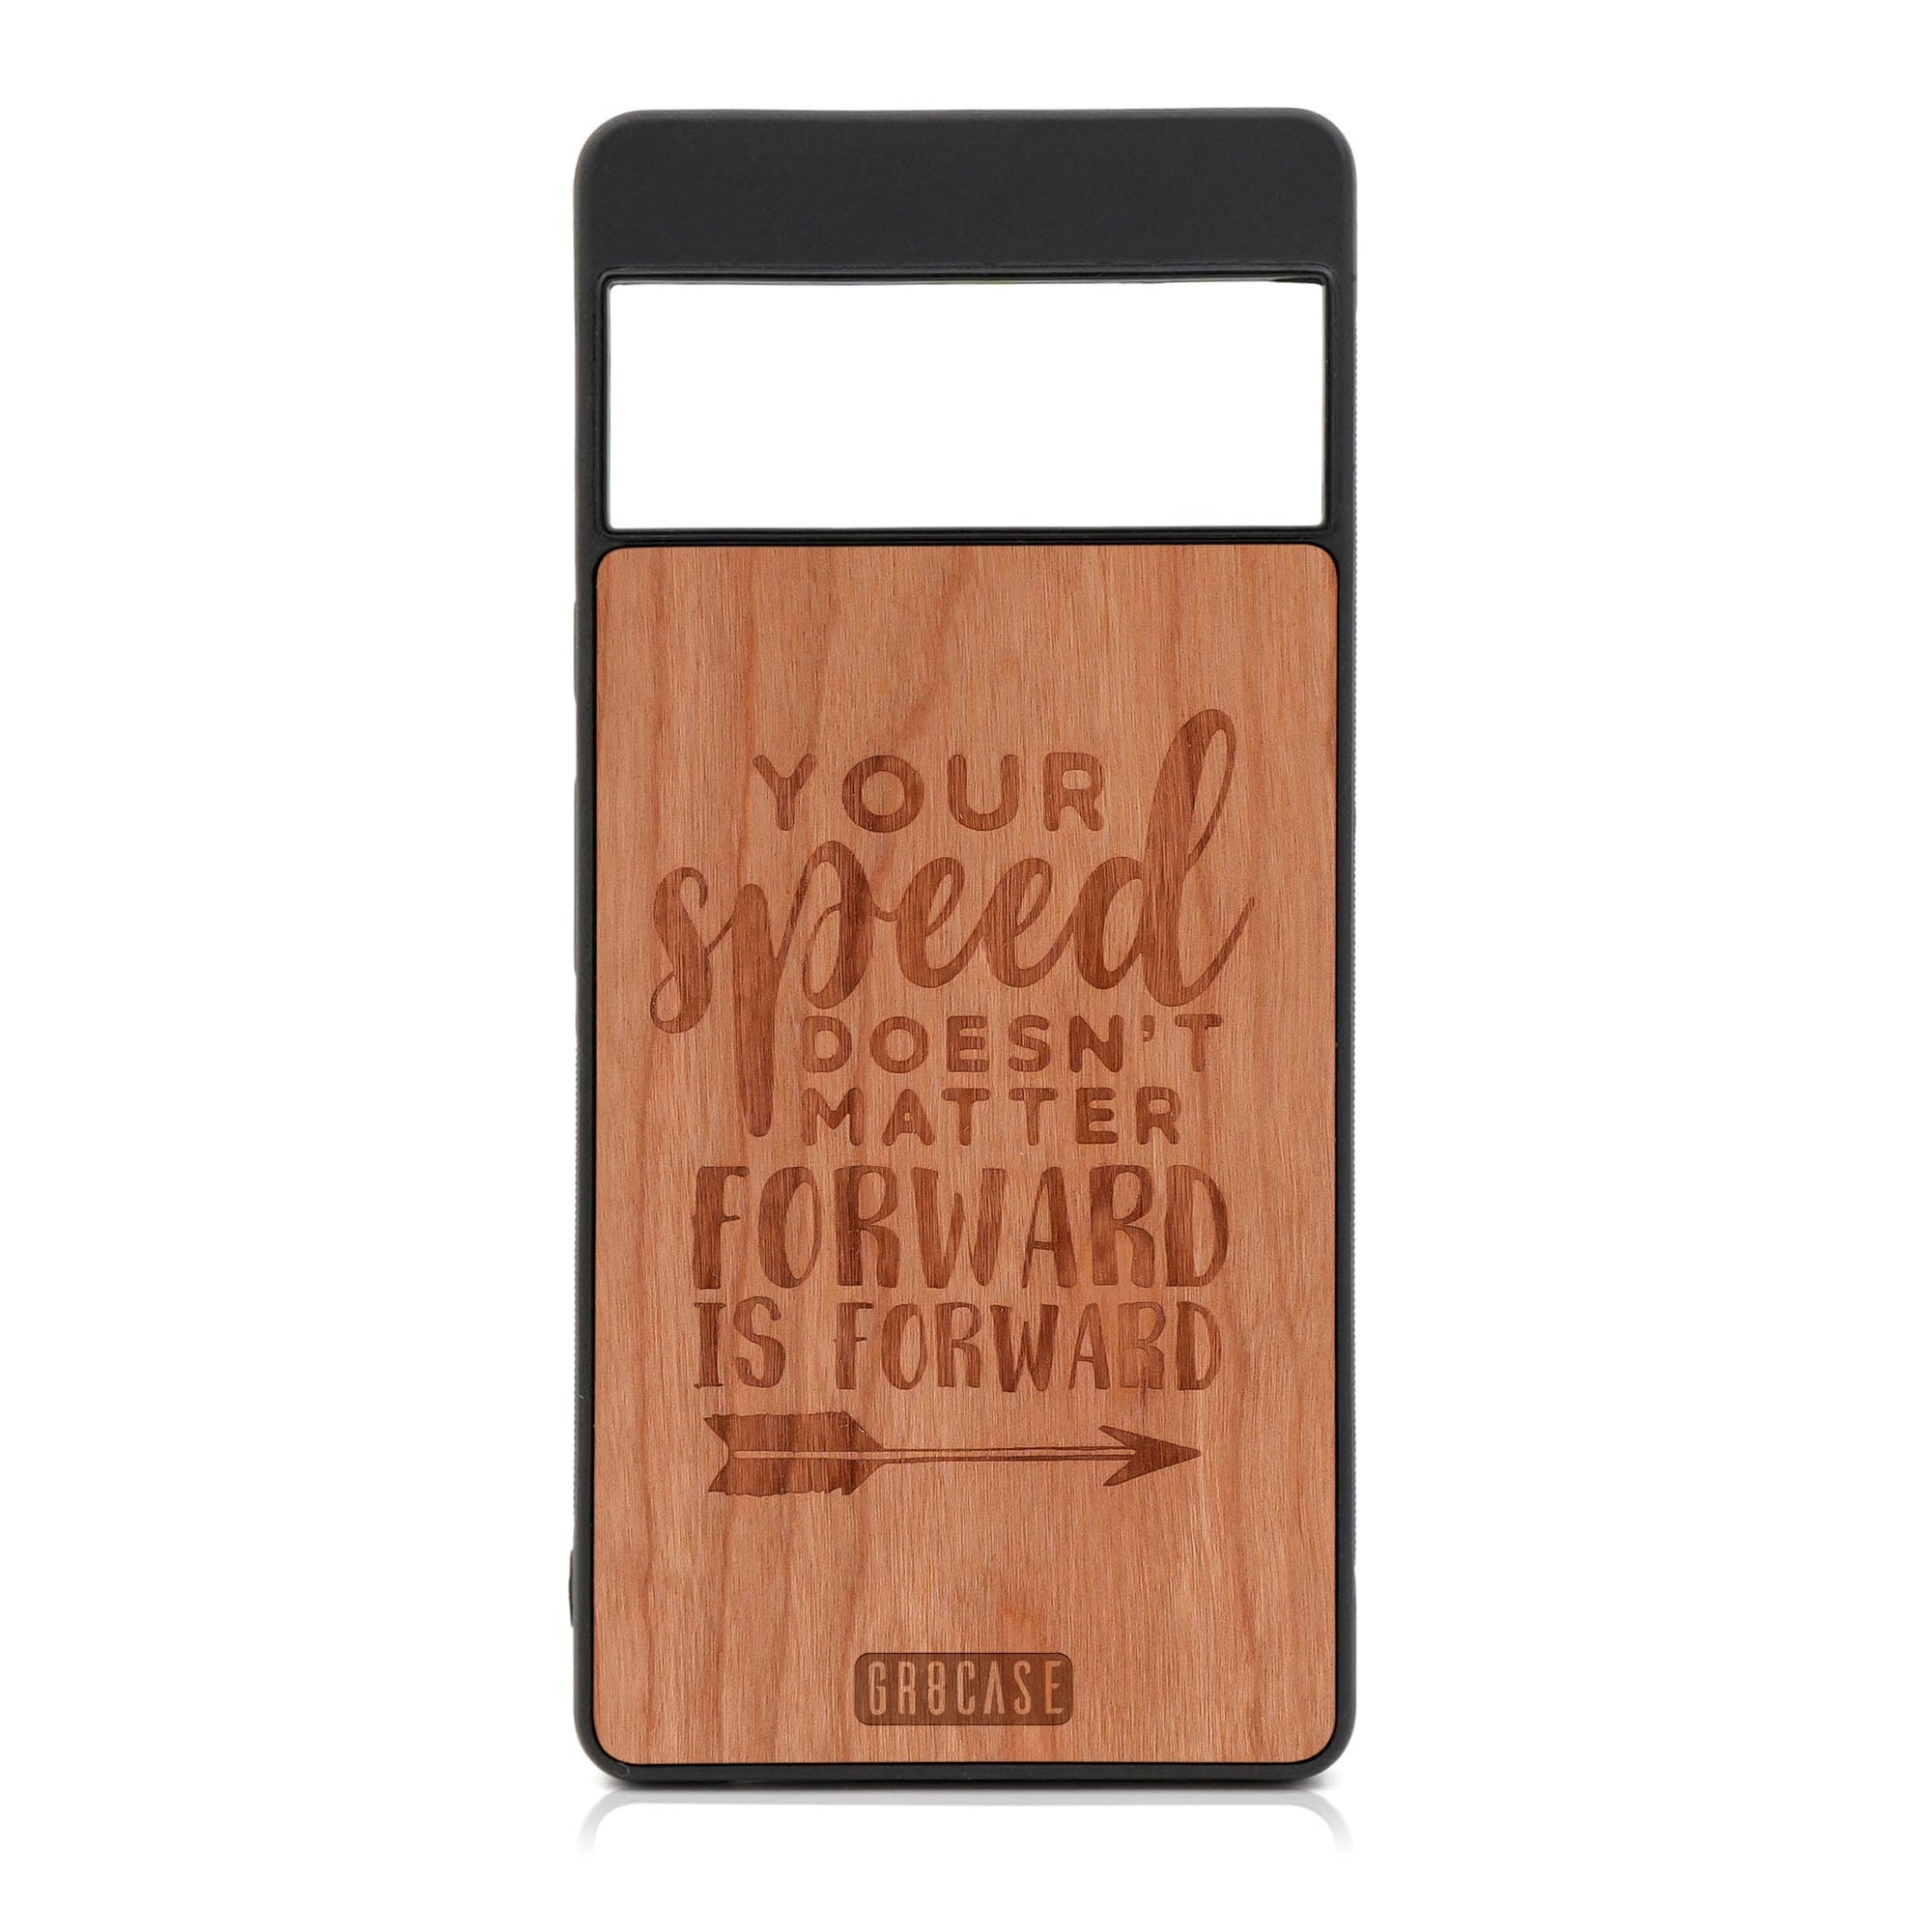 Your Speed Doesn't Matter Forward Is Forward Design Wood Case For Google Pixel 6A